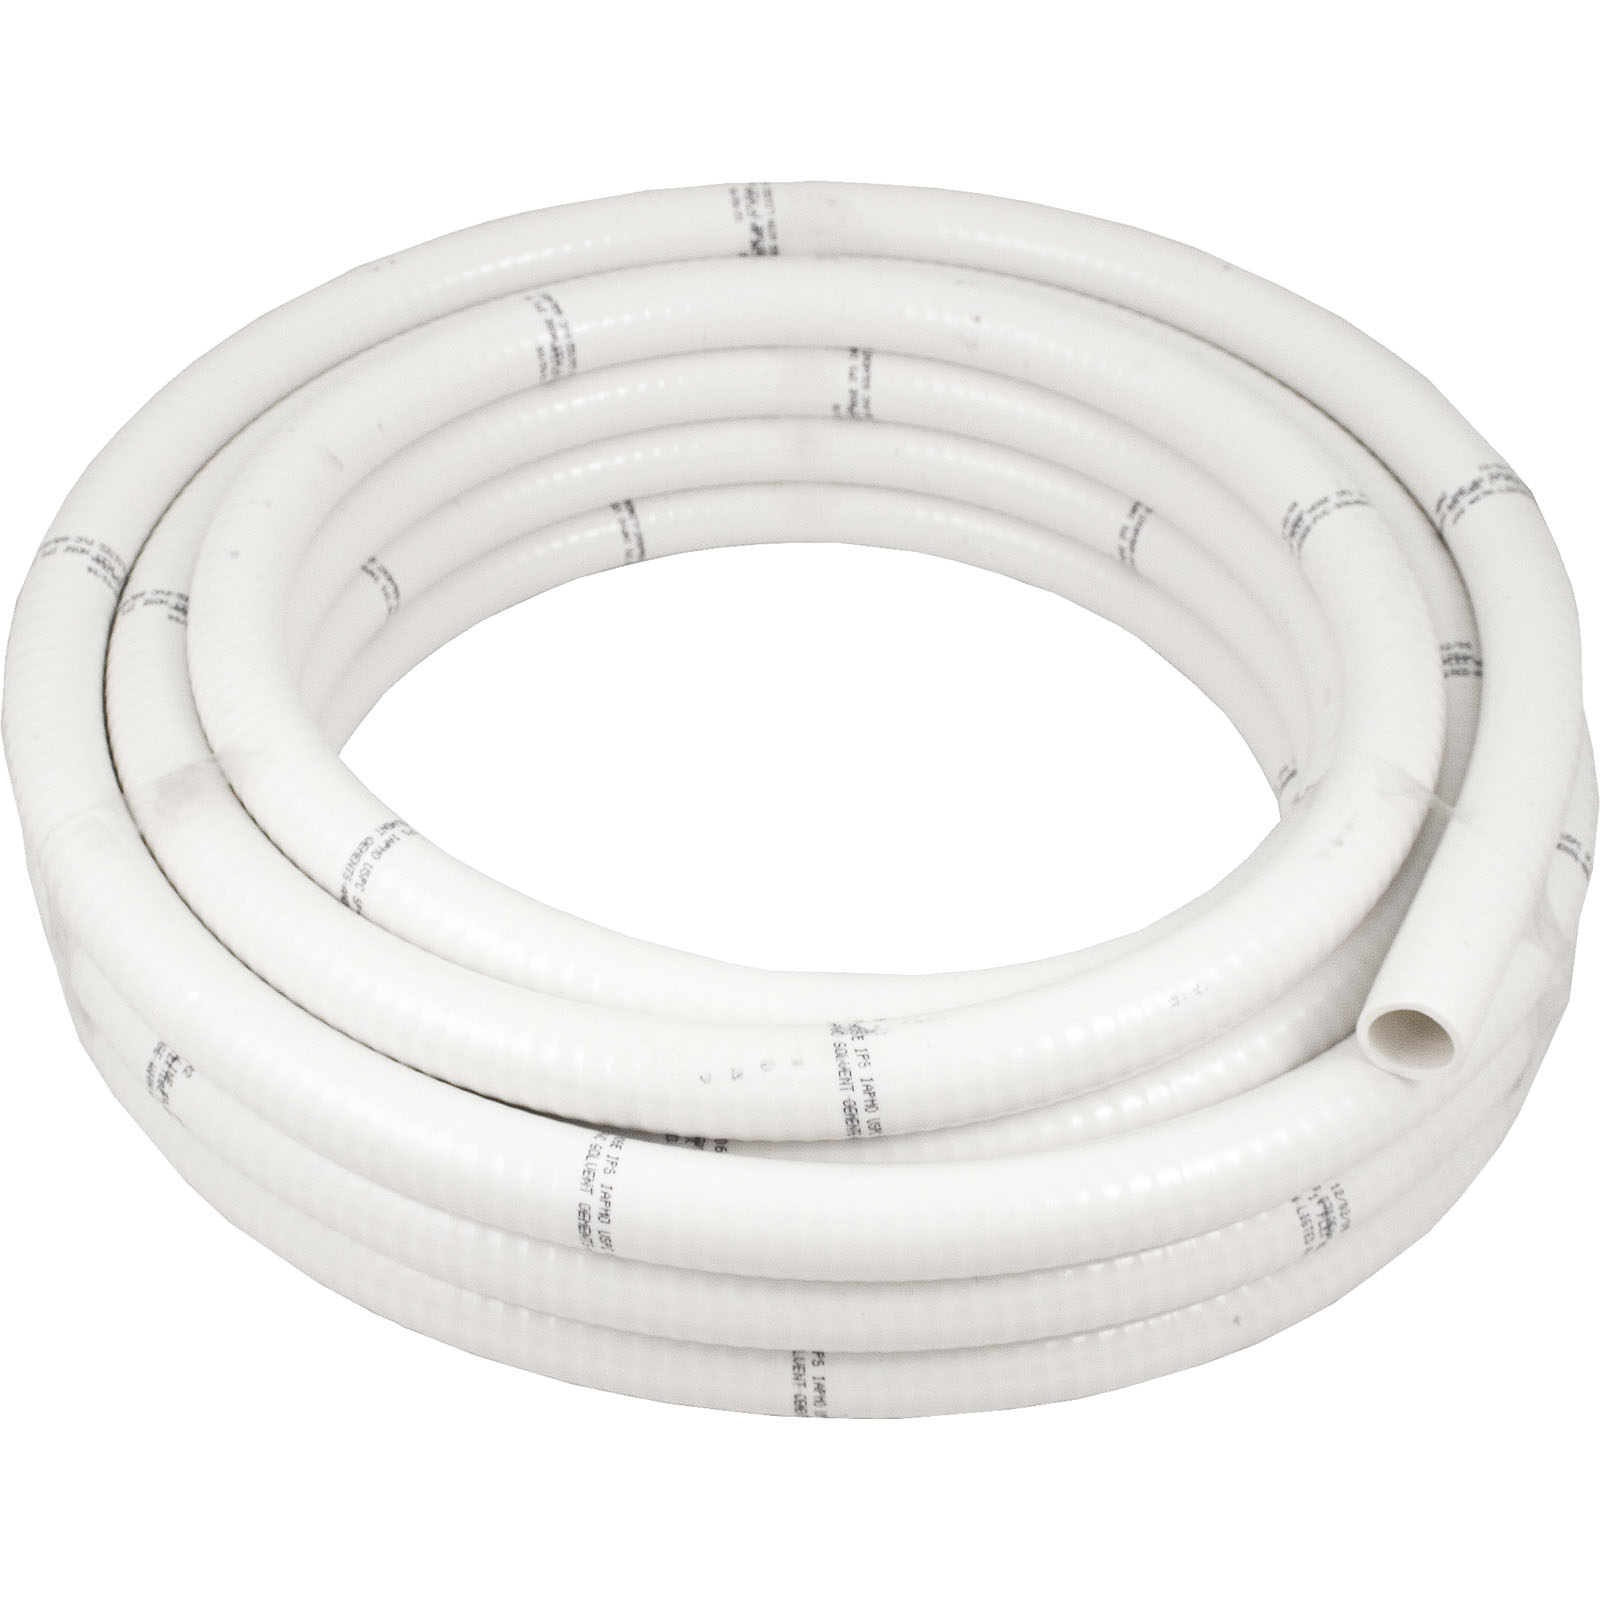 Picture of Flexible PVC Pipe, 1" x 50 foot